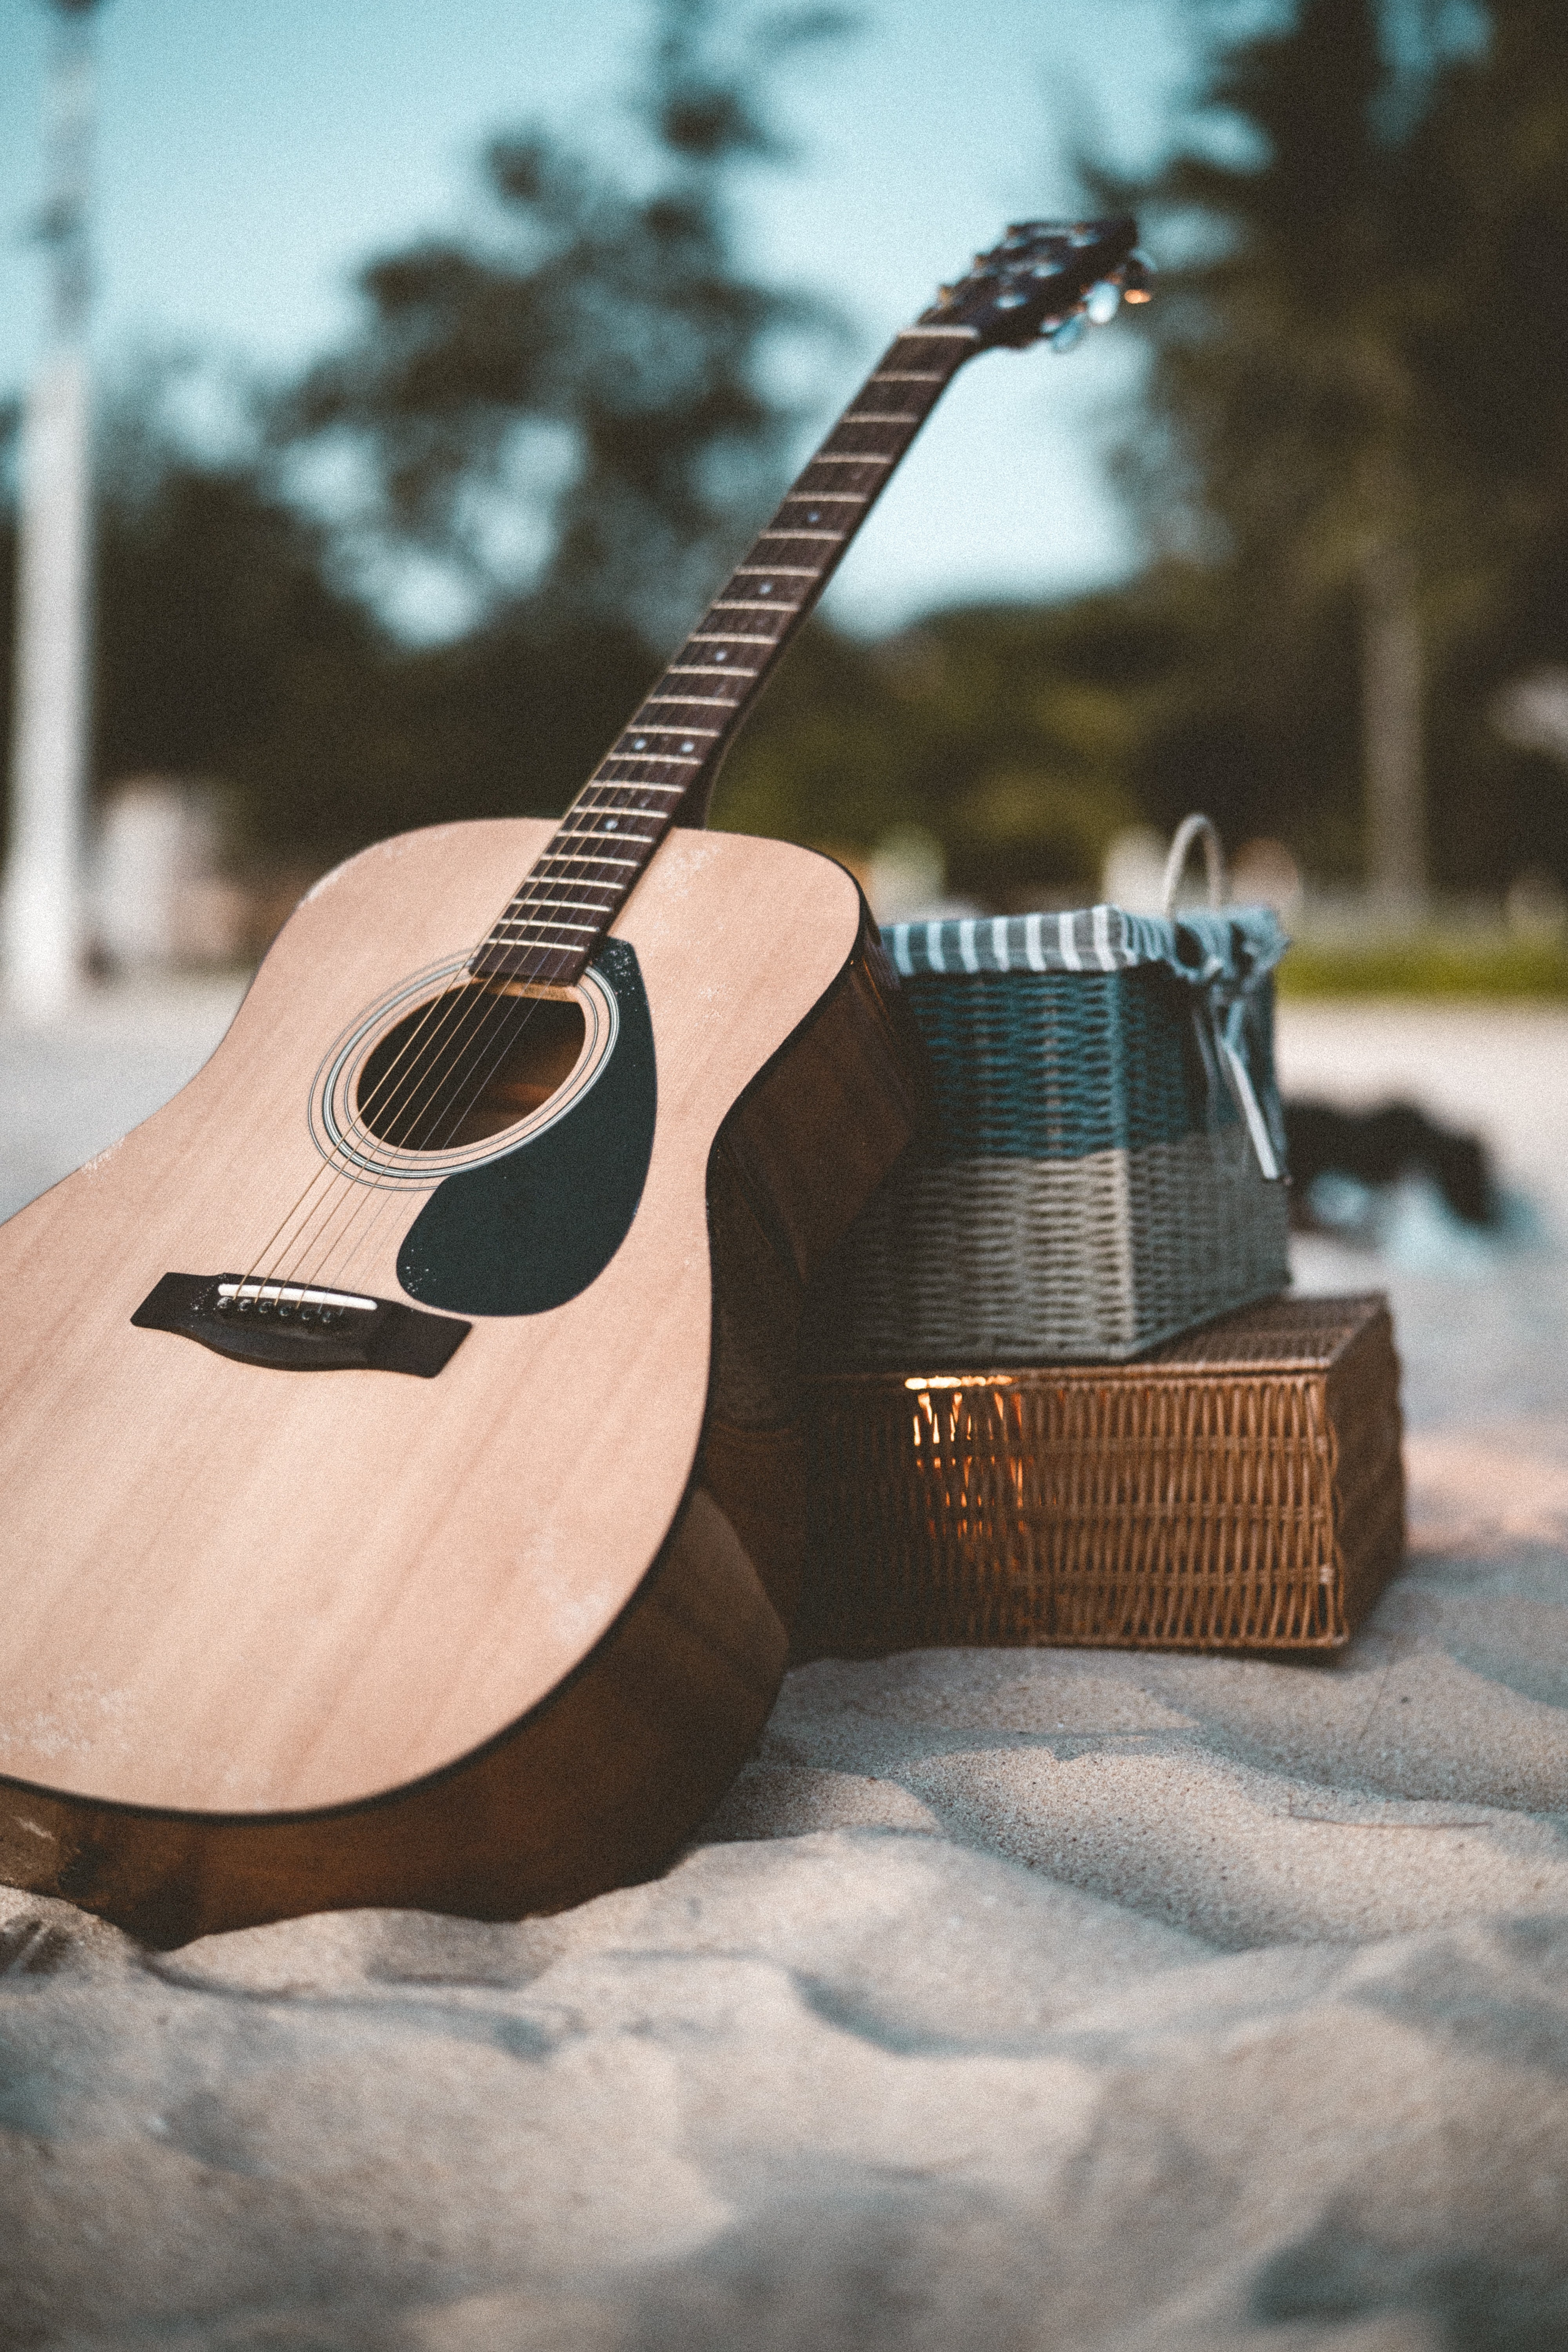 guitar, acoustic guitar, music, sand, brown, musical instrument cellphone